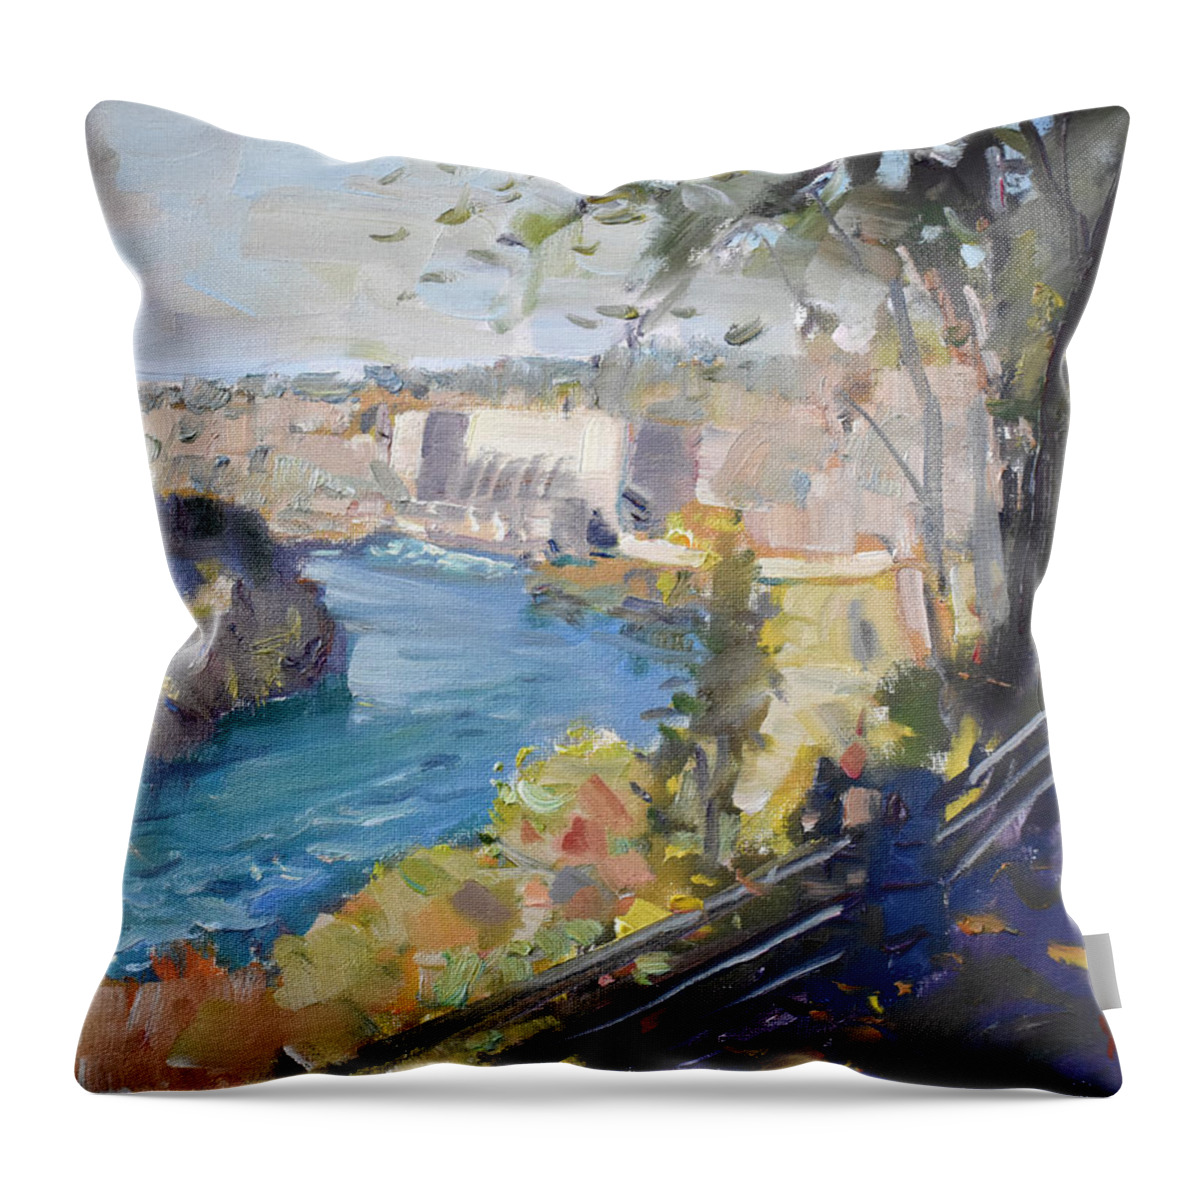 Niagara Gorge Throw Pillow featuring the painting Robert Moses Niagara Hydroelectric Power Station by Ylli Haruni